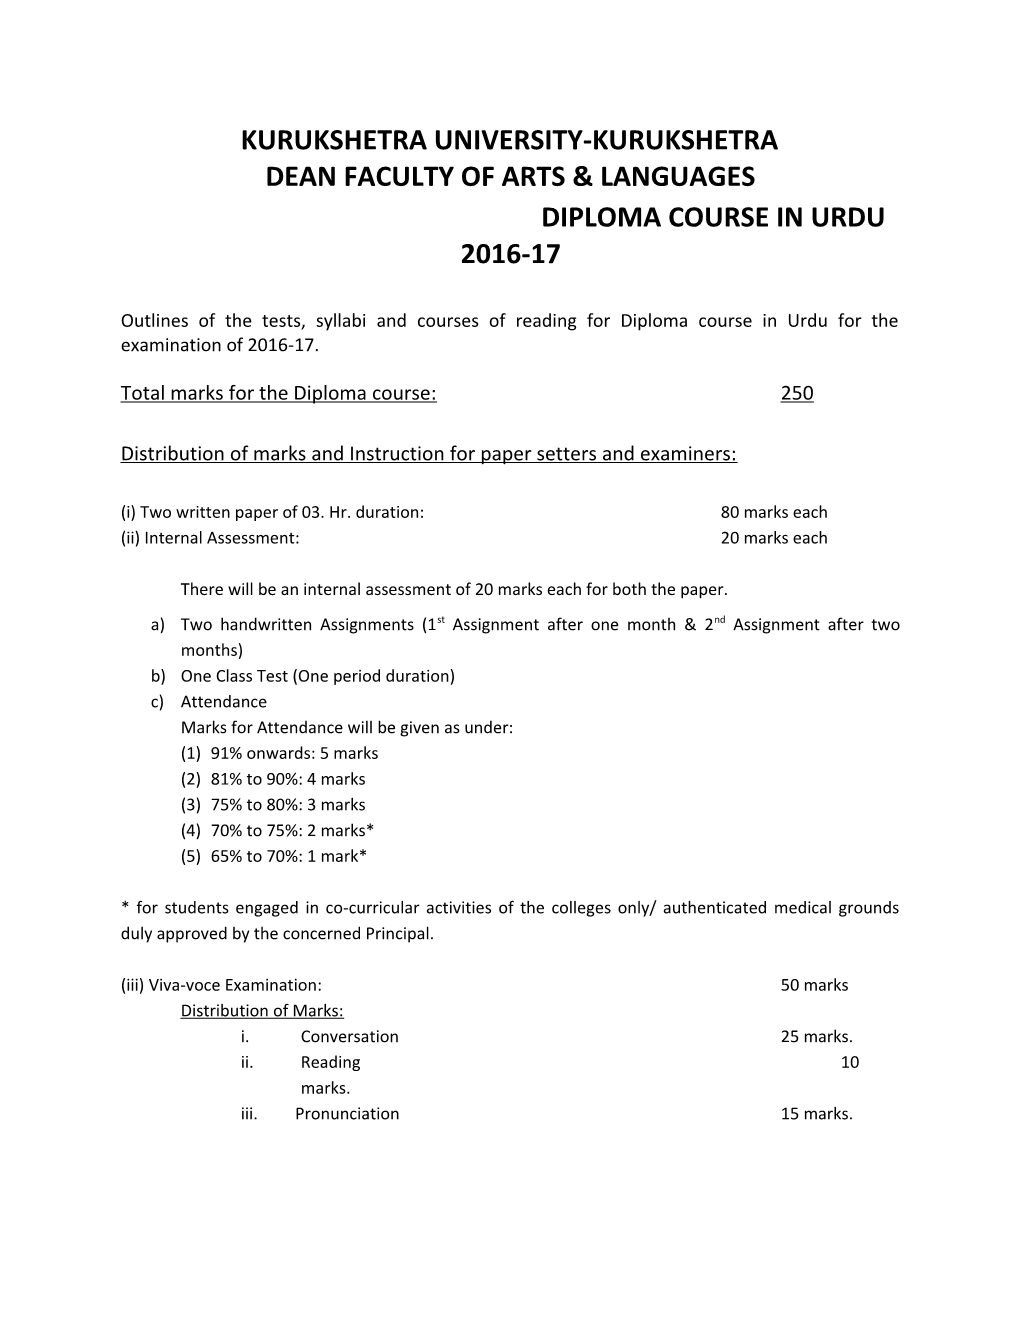 Dean Faculty of Arts & Languages s1